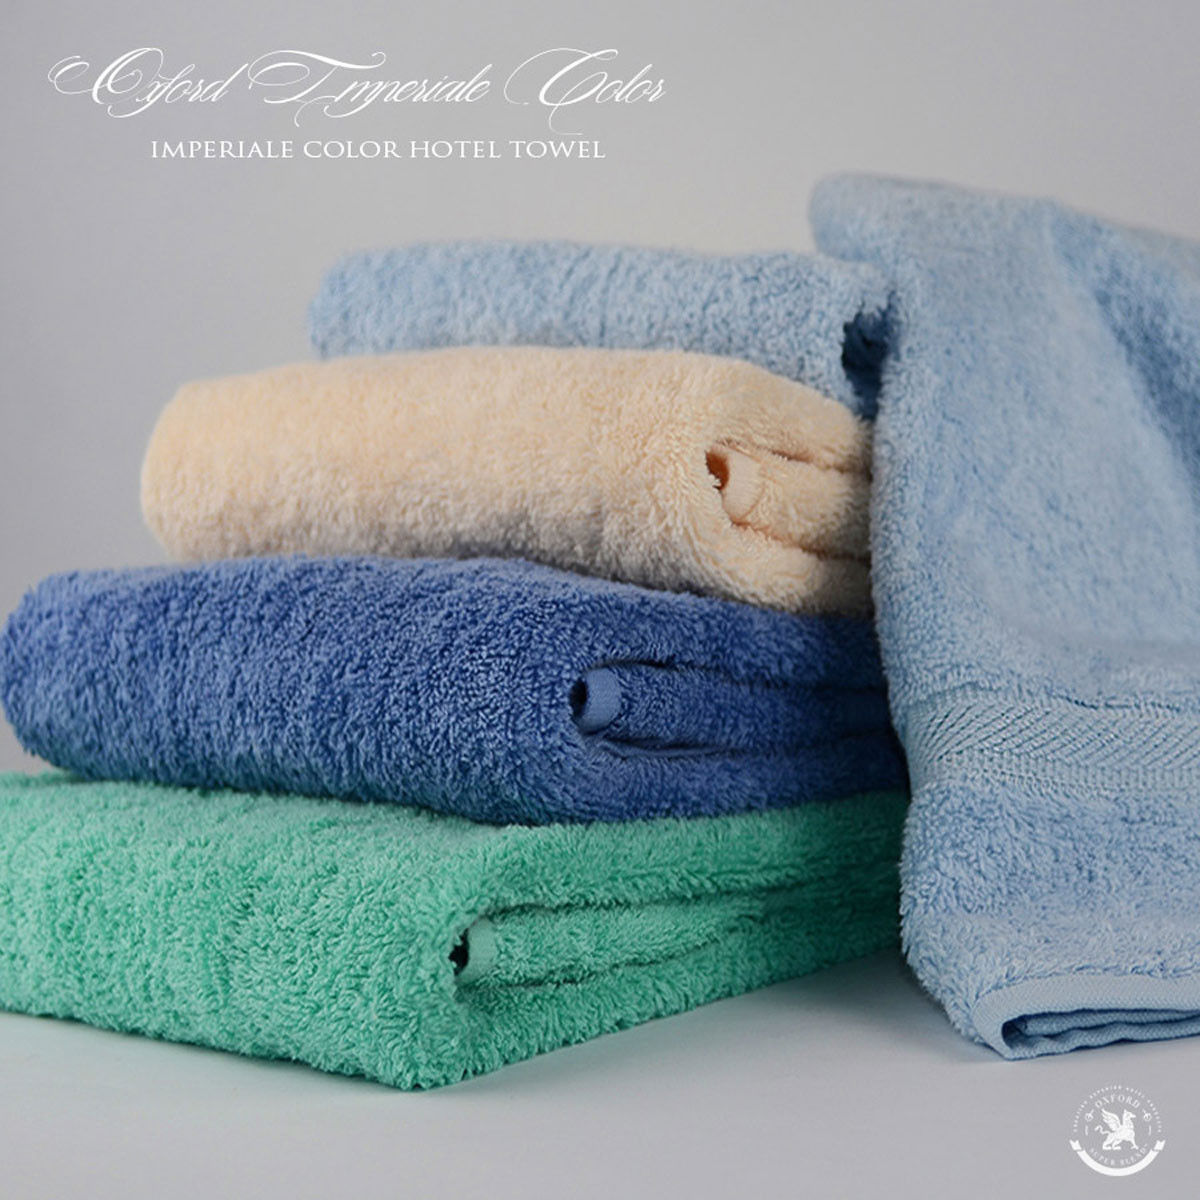 Which other colors can I get the Oxford Imperiale Kashmir Green Oxford towels in?